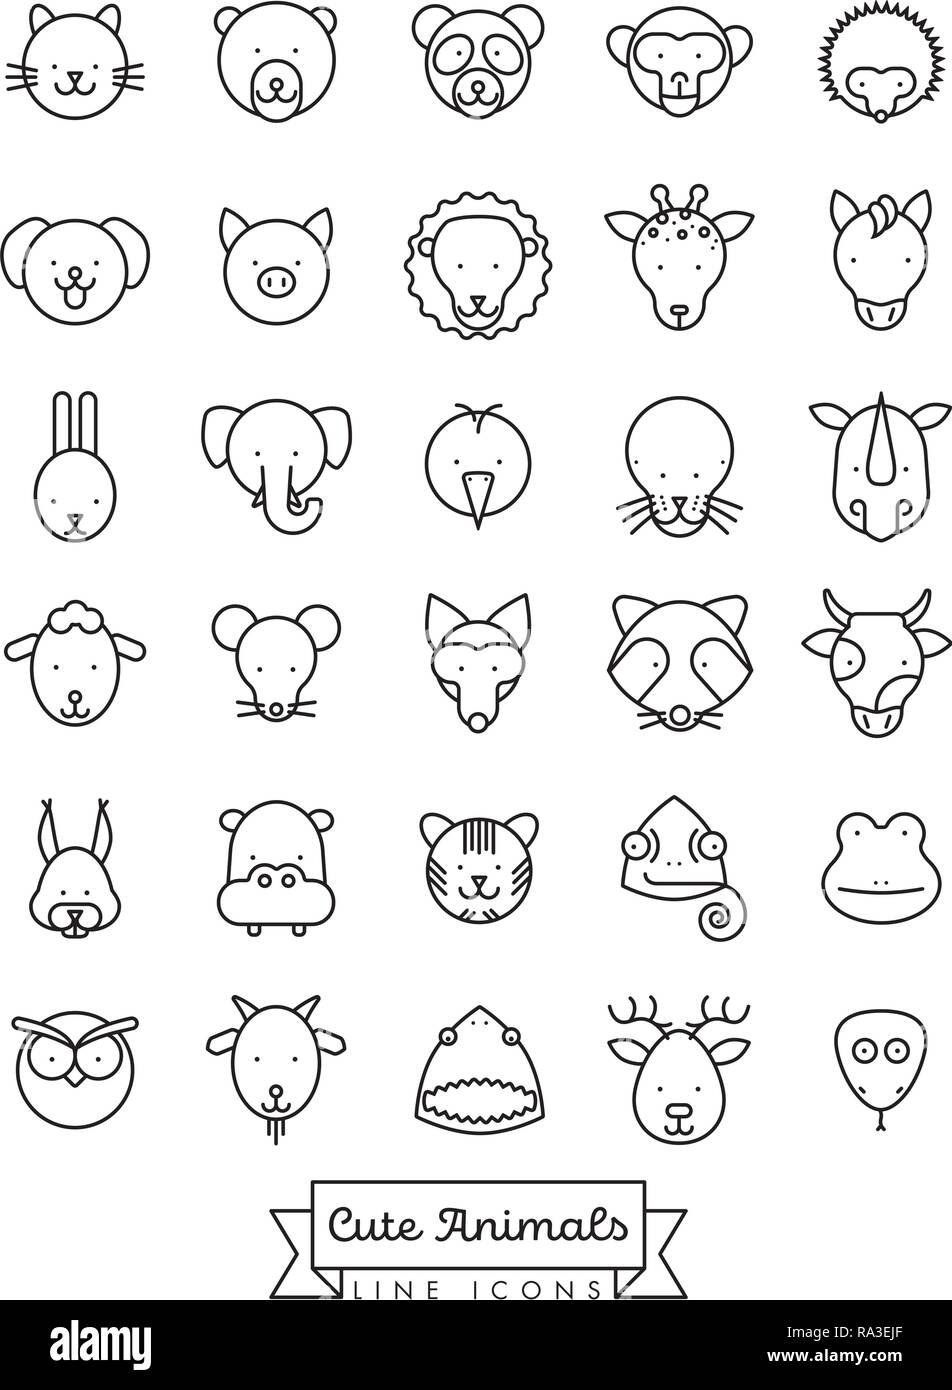 Collection of cute animal faces vector line icons. Pet, cattle and wild creatures symbols. Stock Vector